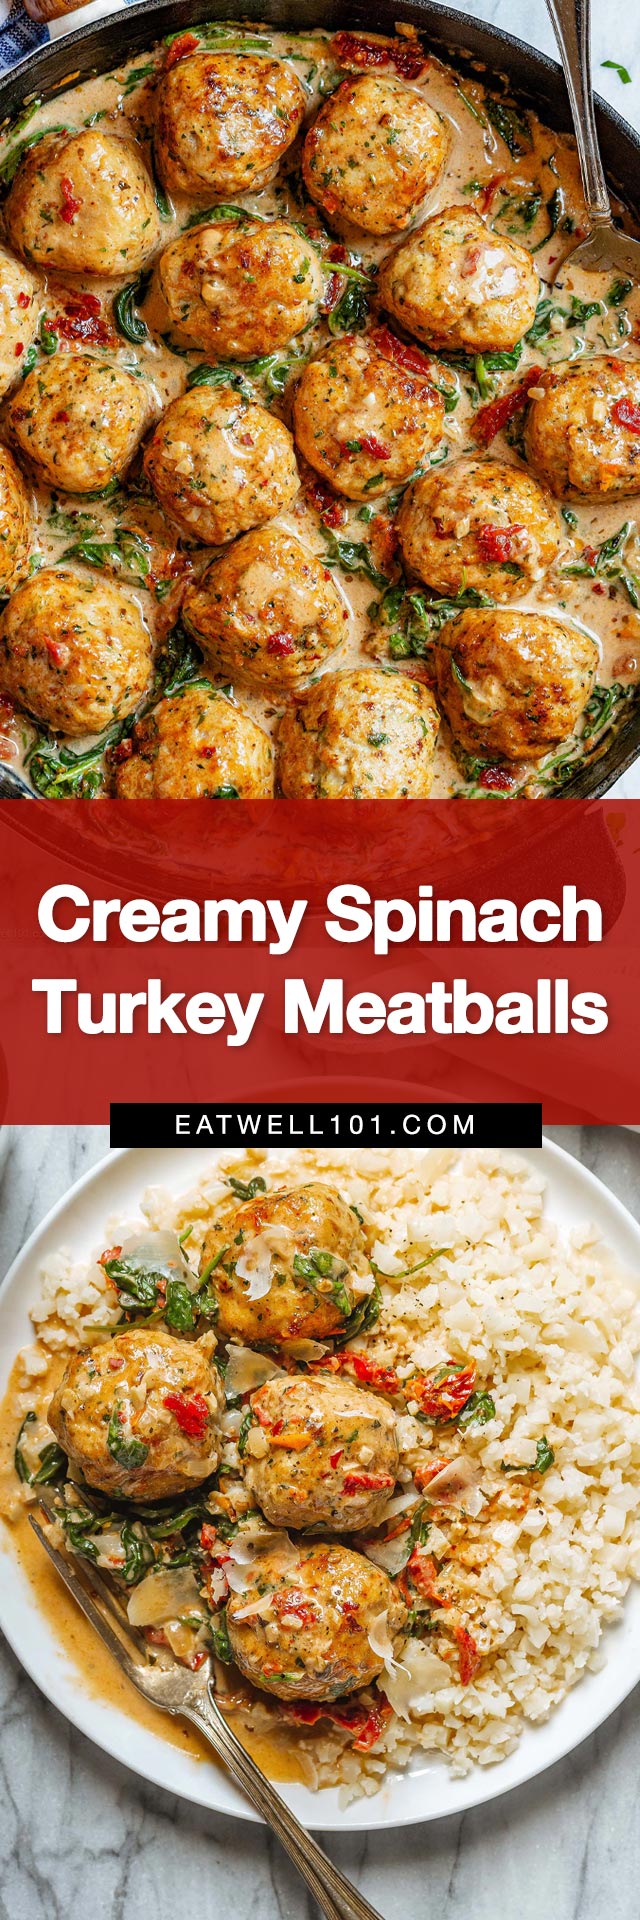 Creamy Spinach Turkey Meatballs Recipe - #turkey #chicken #meatballs #recipe #eatwell101 - These turkey meatballs are Gluten-free, low-carb, and veto-friendly - Perfect for a crowd-pleasing weeknight dinner.